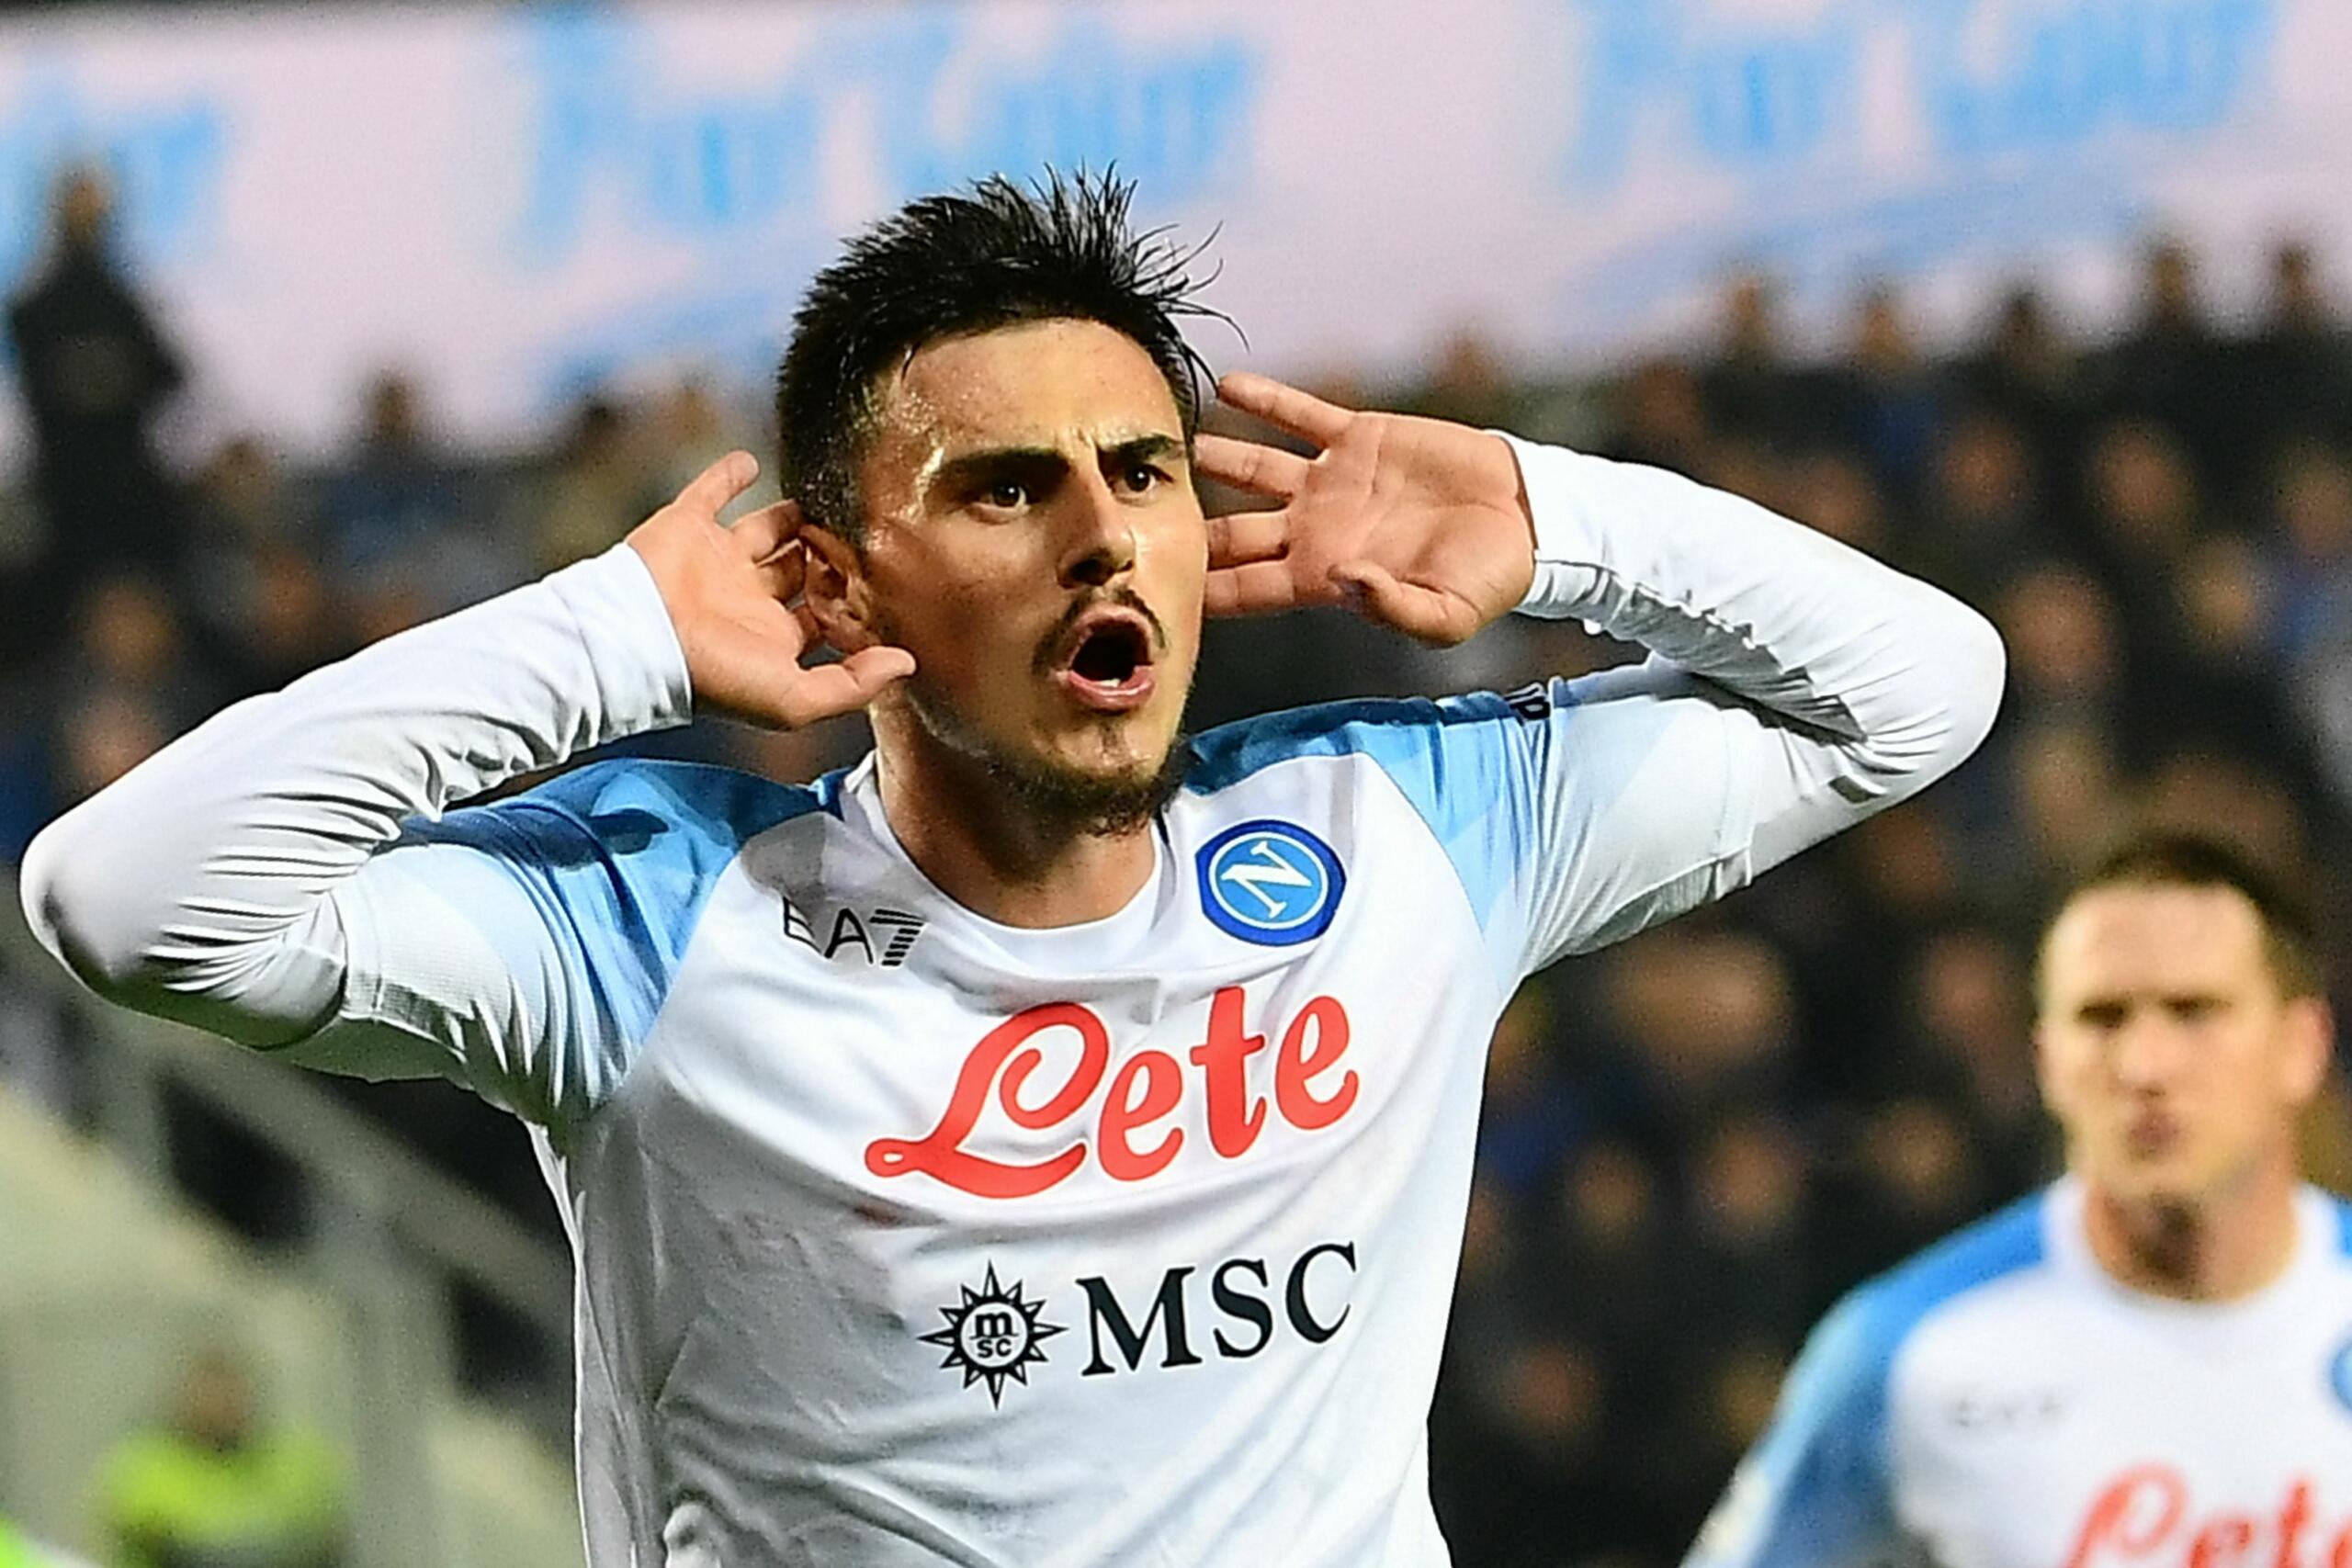 RB Leipzig are pursuing Elijf Elmas, and the deal with Napoli has a good chance of going through. The player is keen on transferring.